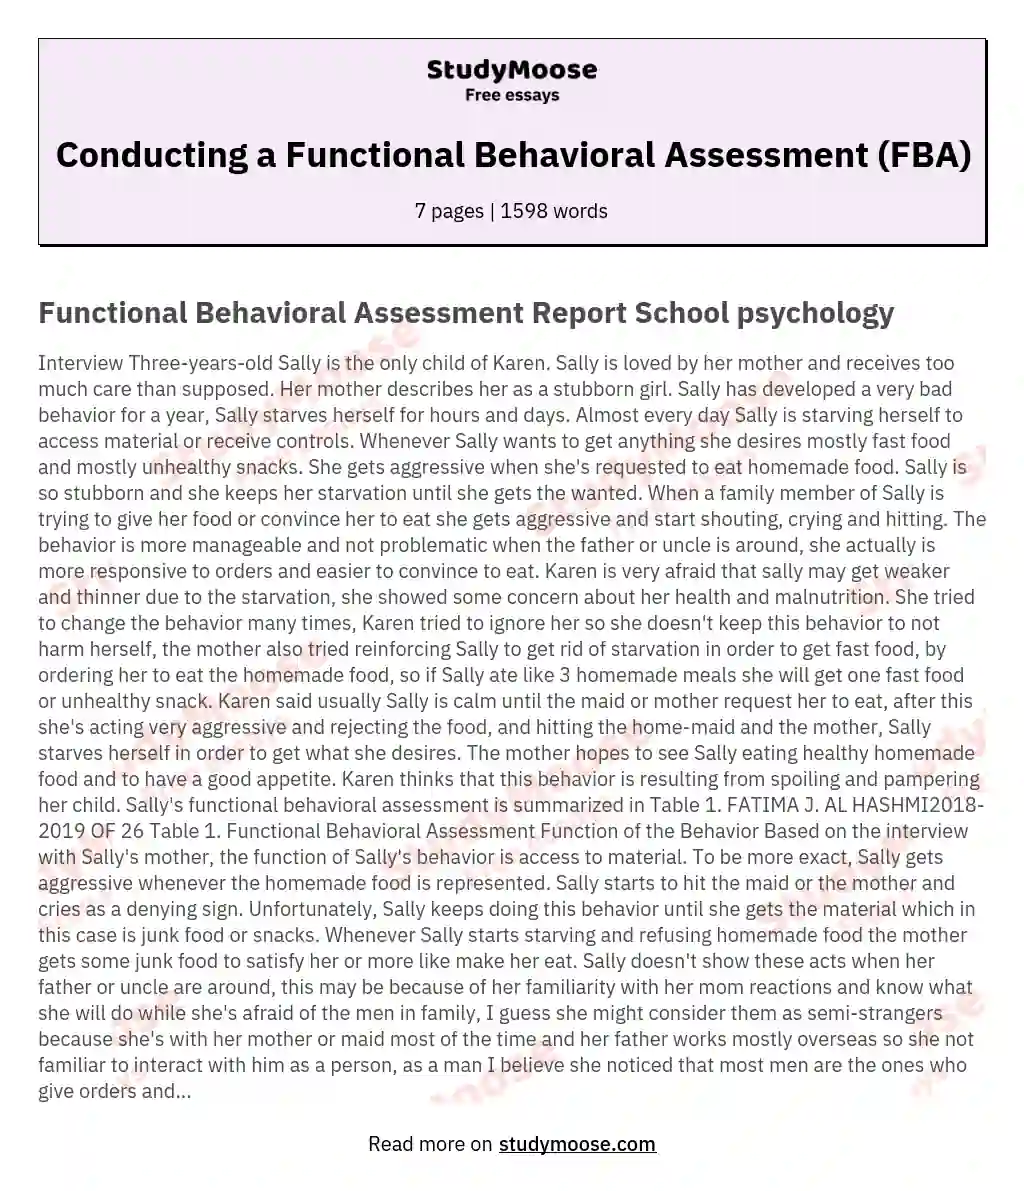 Conducting a Functional Behavioral Assessment (FBA)